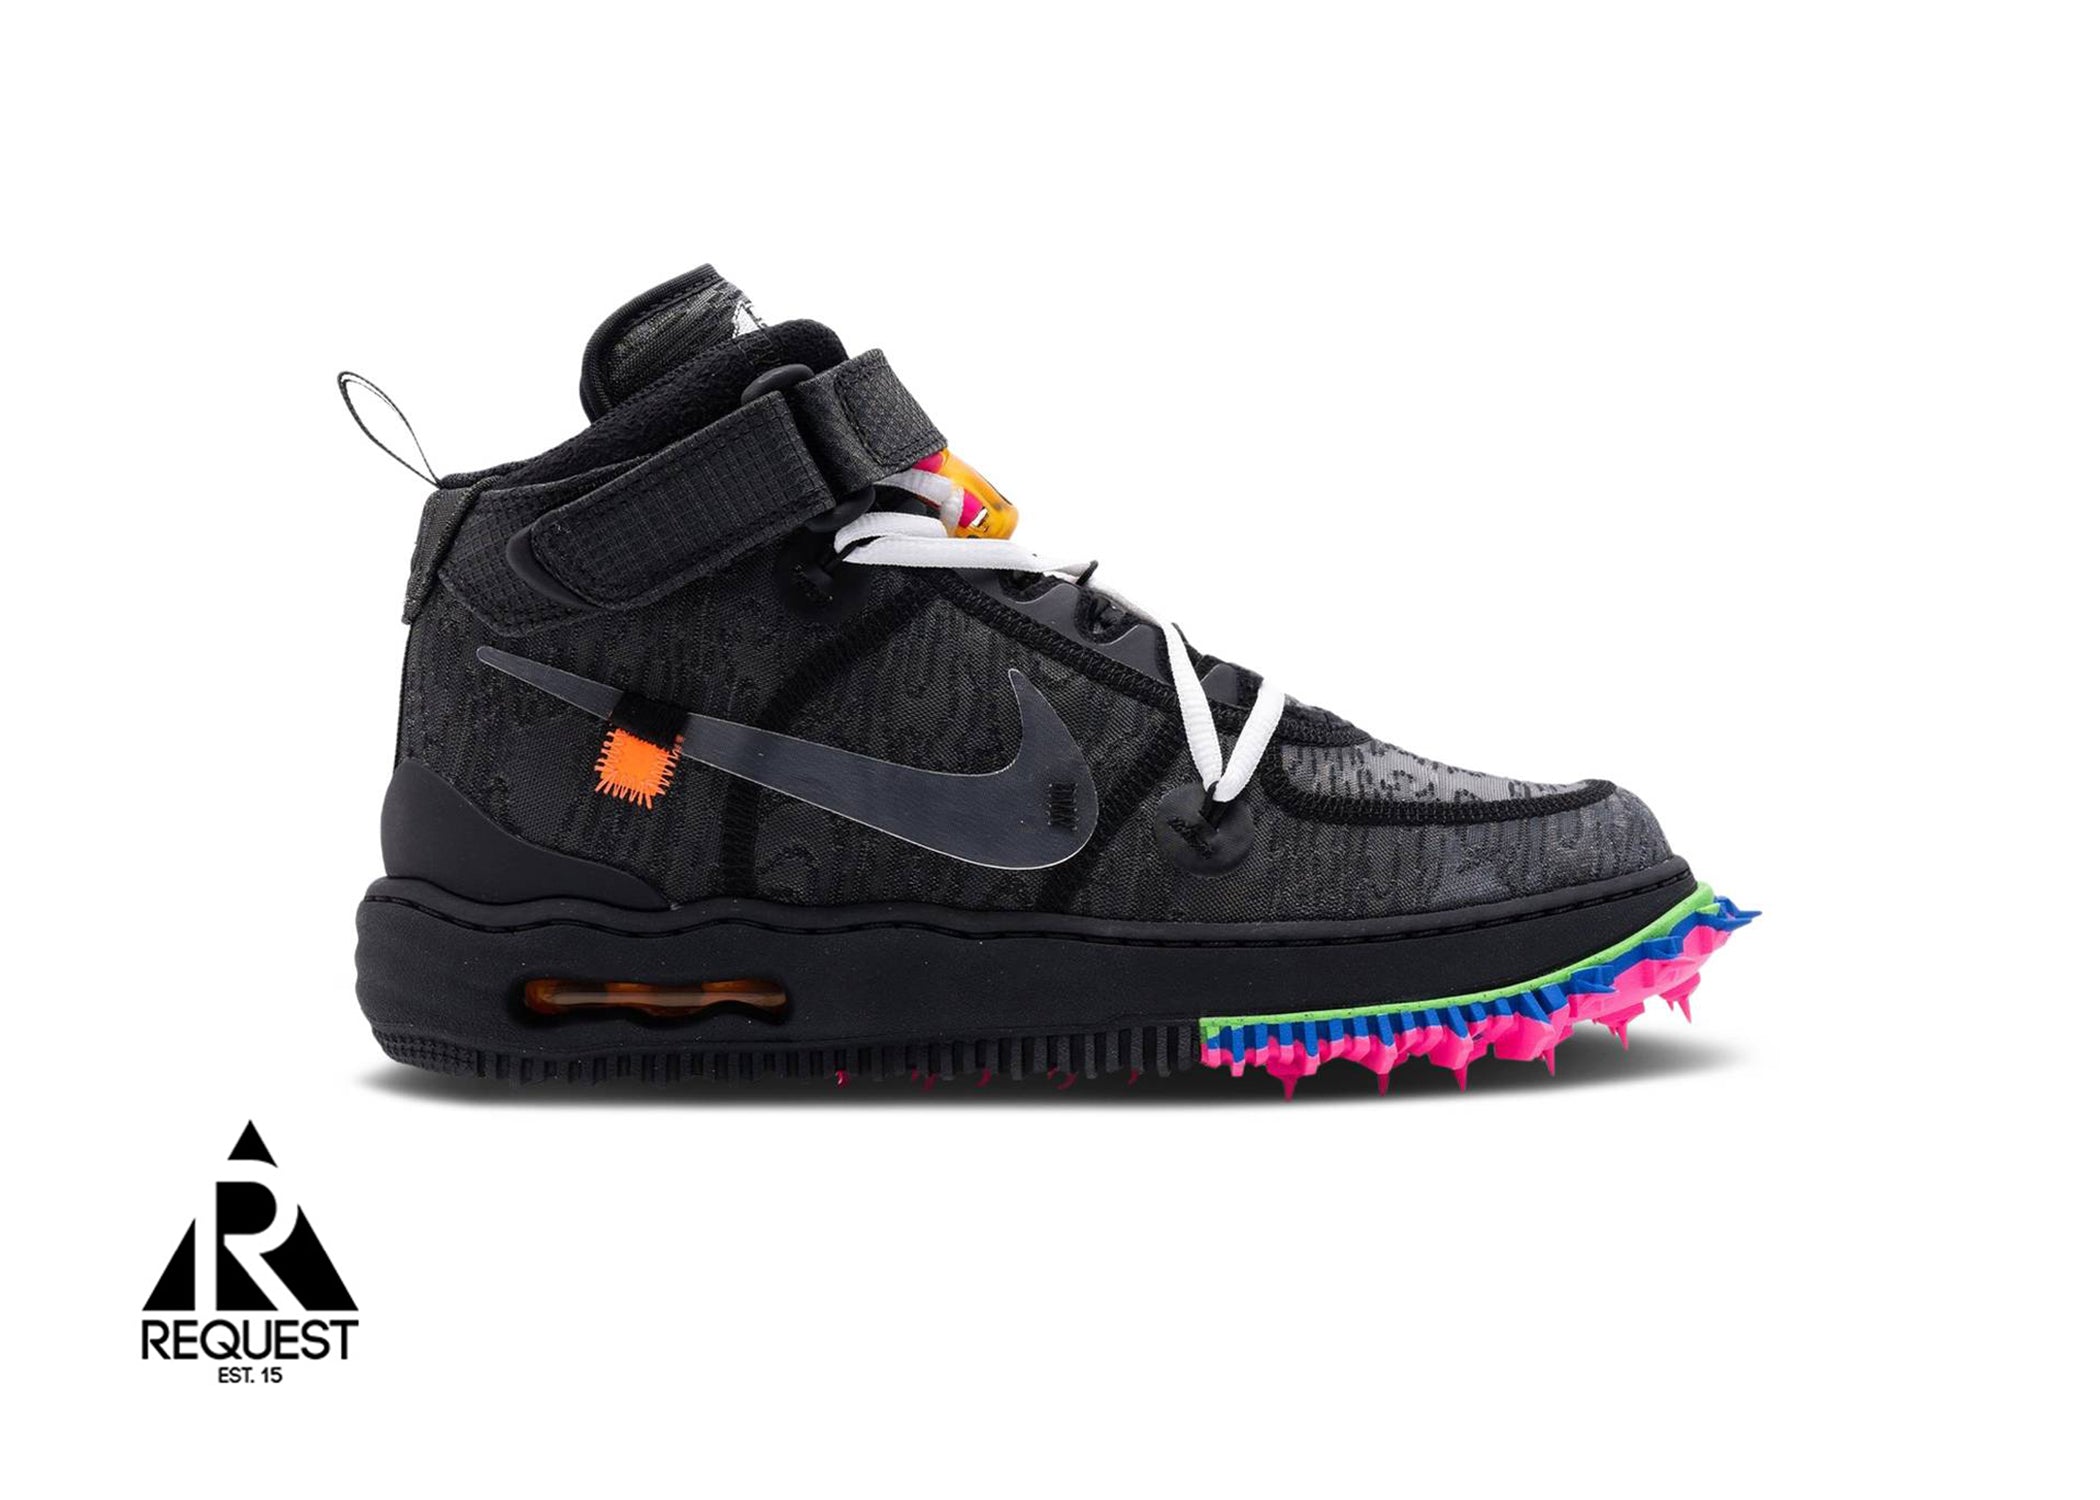 Nike x Off White Air Force 1 Mid - Black